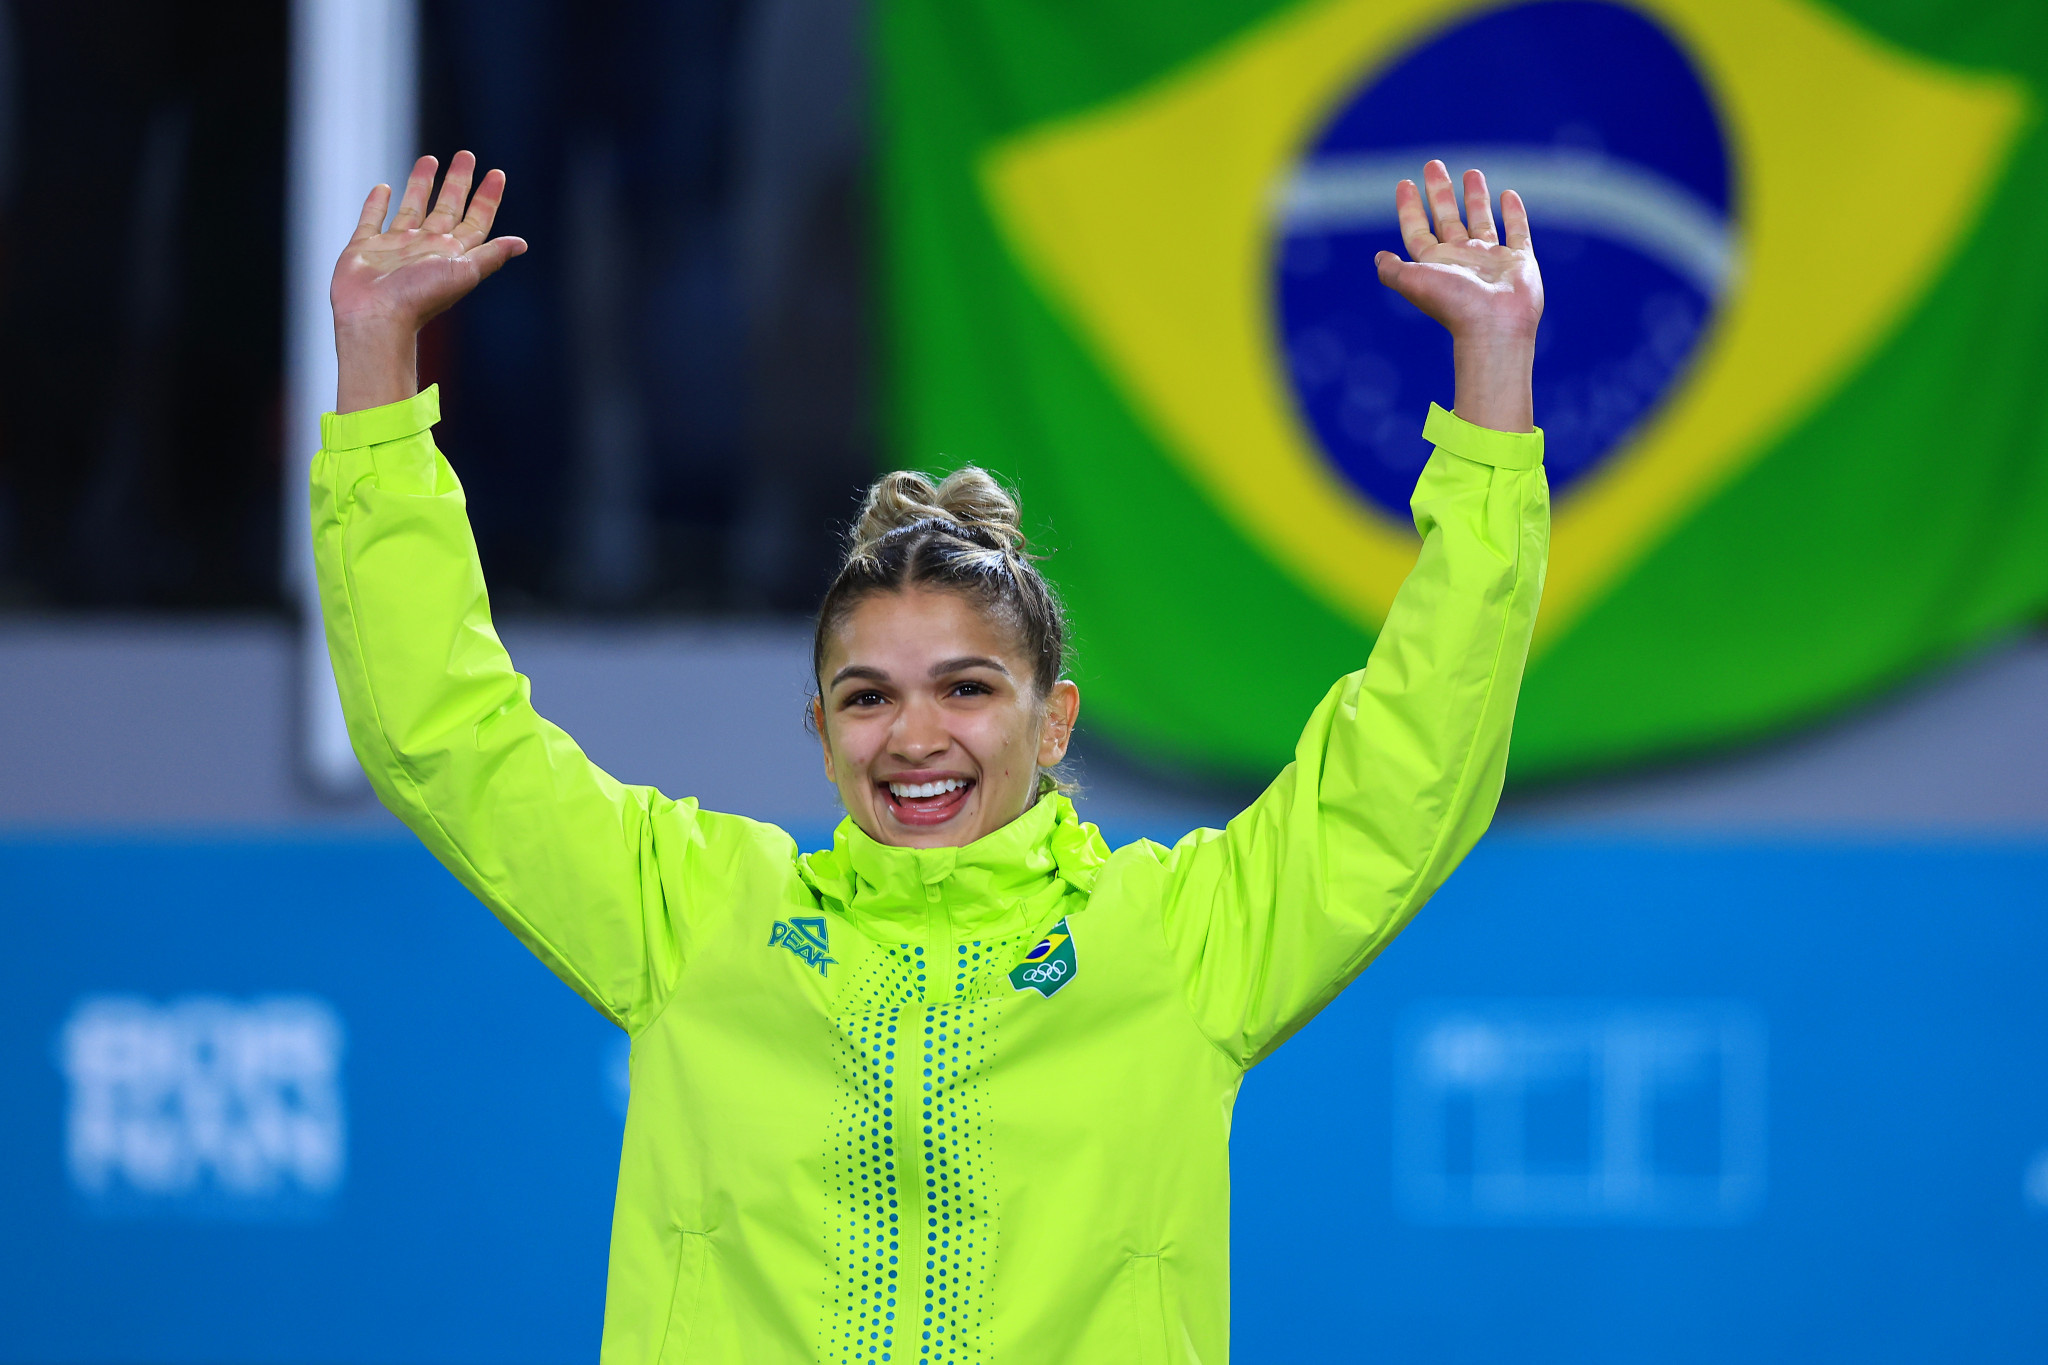 Brazil's Larissa Pimenta defended her women's under-52kg judo title at the Pan American Games ©Getty Images
